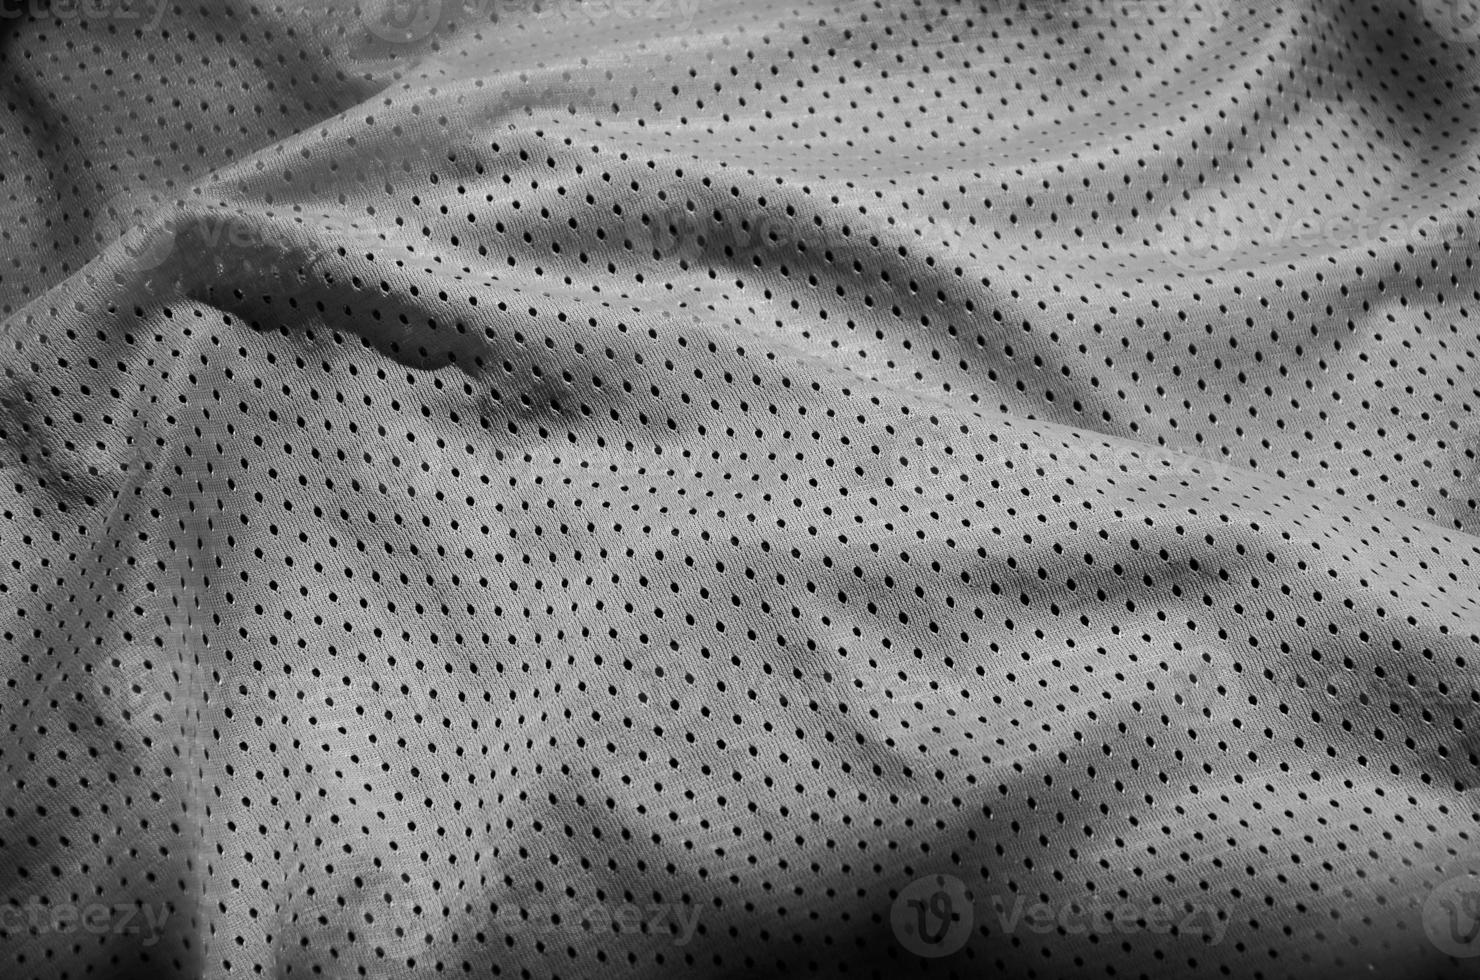 Sport clothing fabric texture background. Top view of grey polyester nylon cloth textile surface. Dark photo